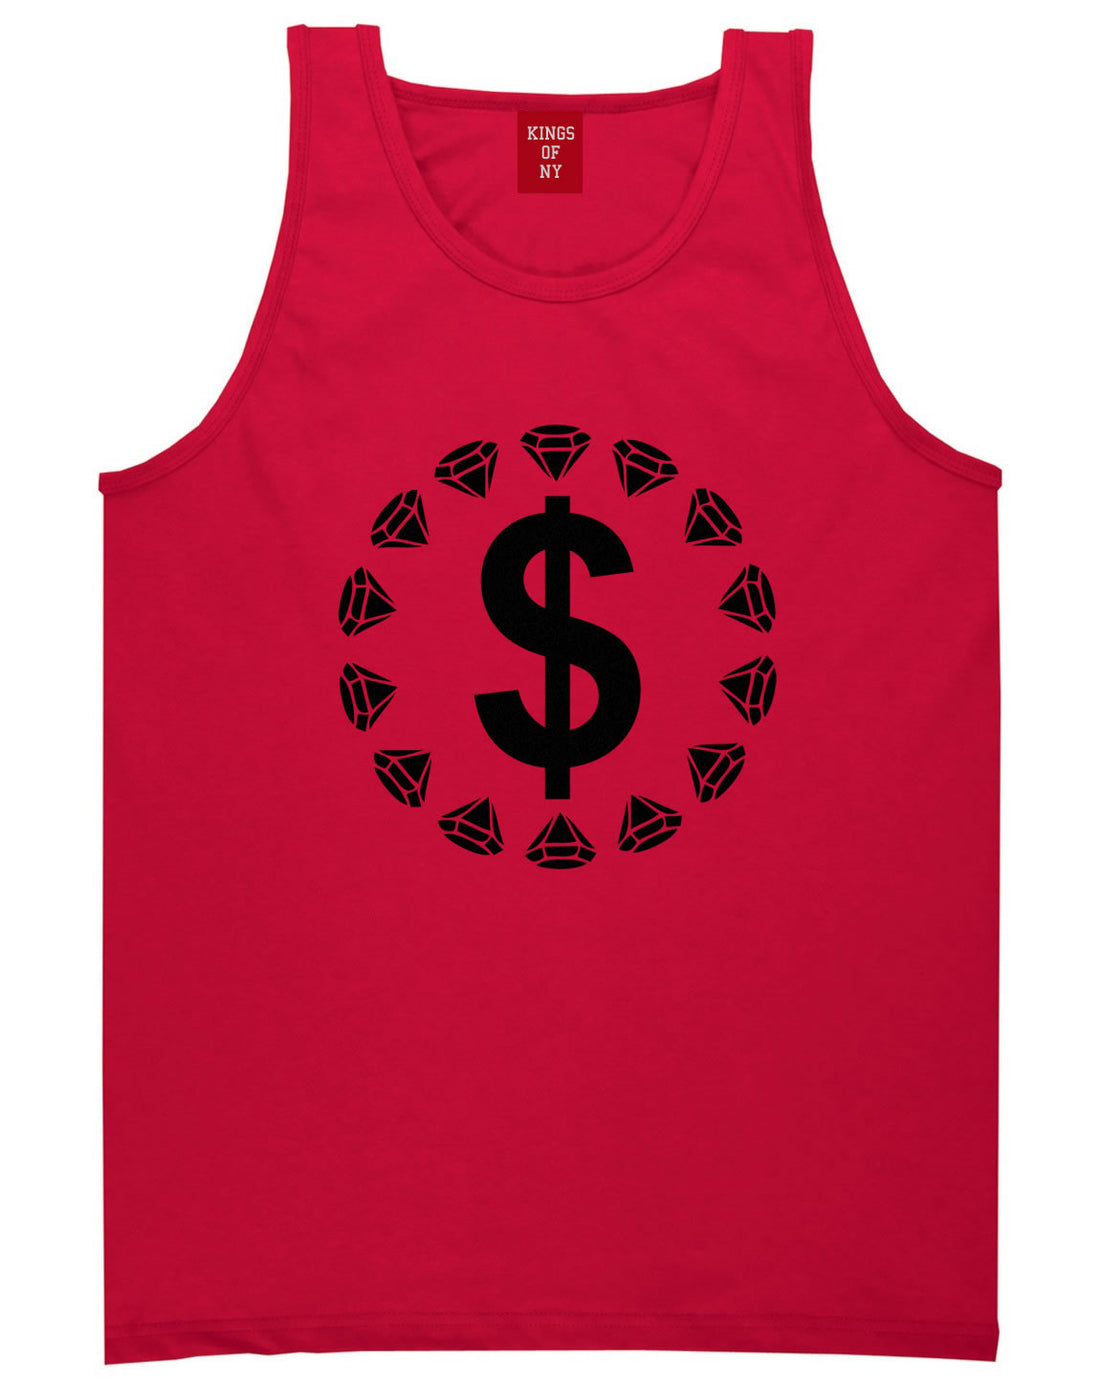 Diamonds Money Sign Logo Tank Top in Red by Kings Of NY